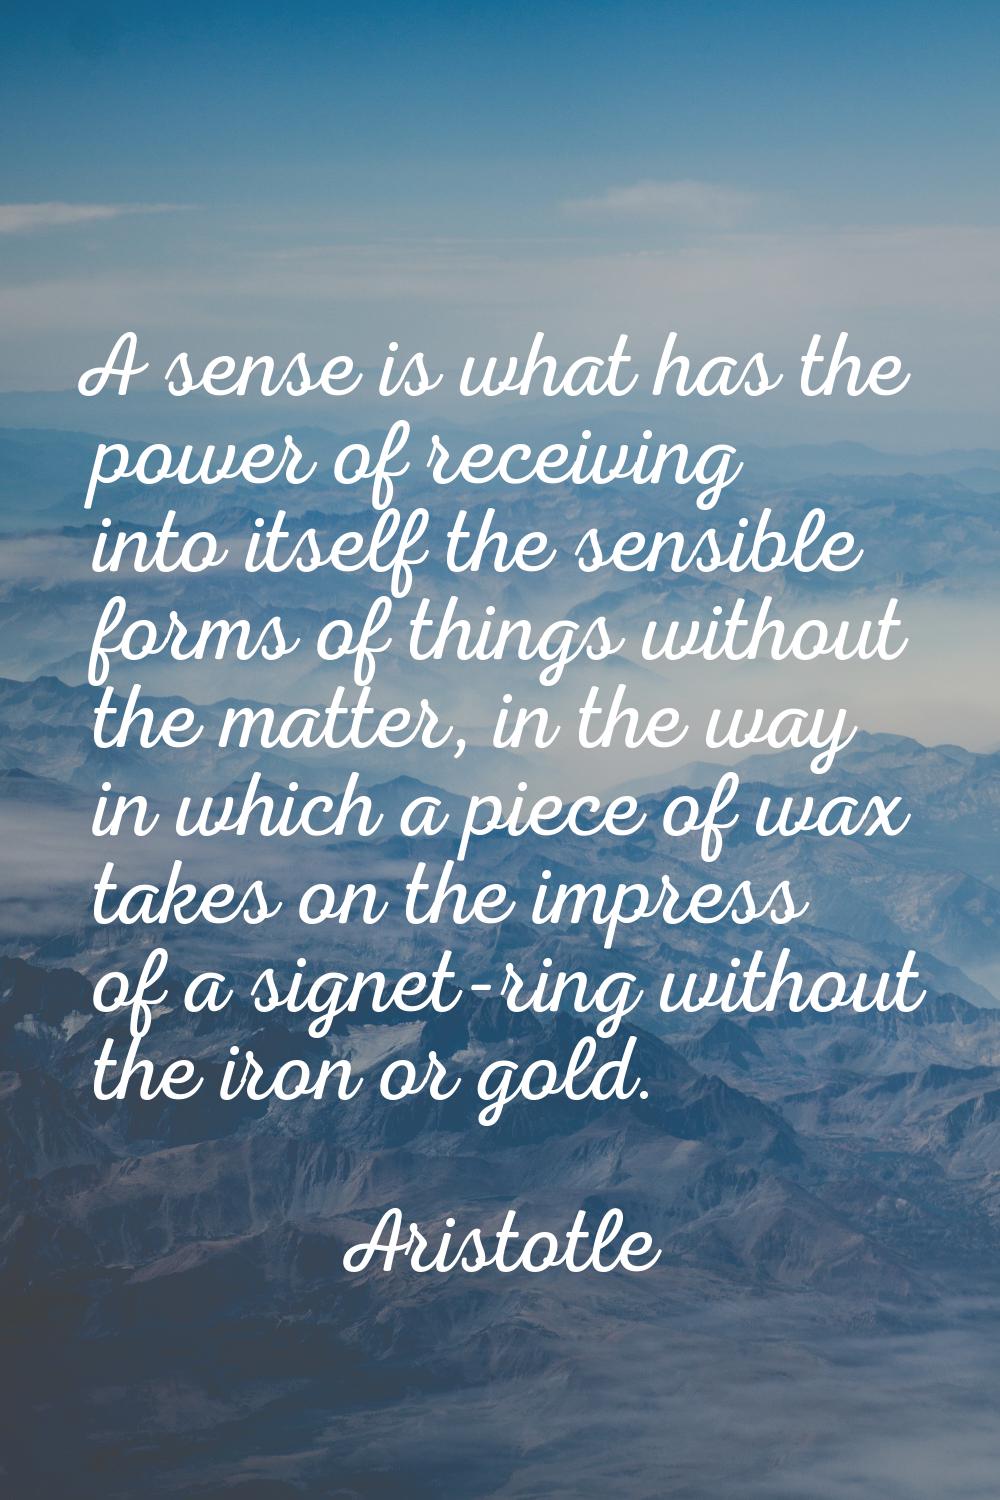 A sense is what has the power of receiving into itself the sensible forms of things without the mat